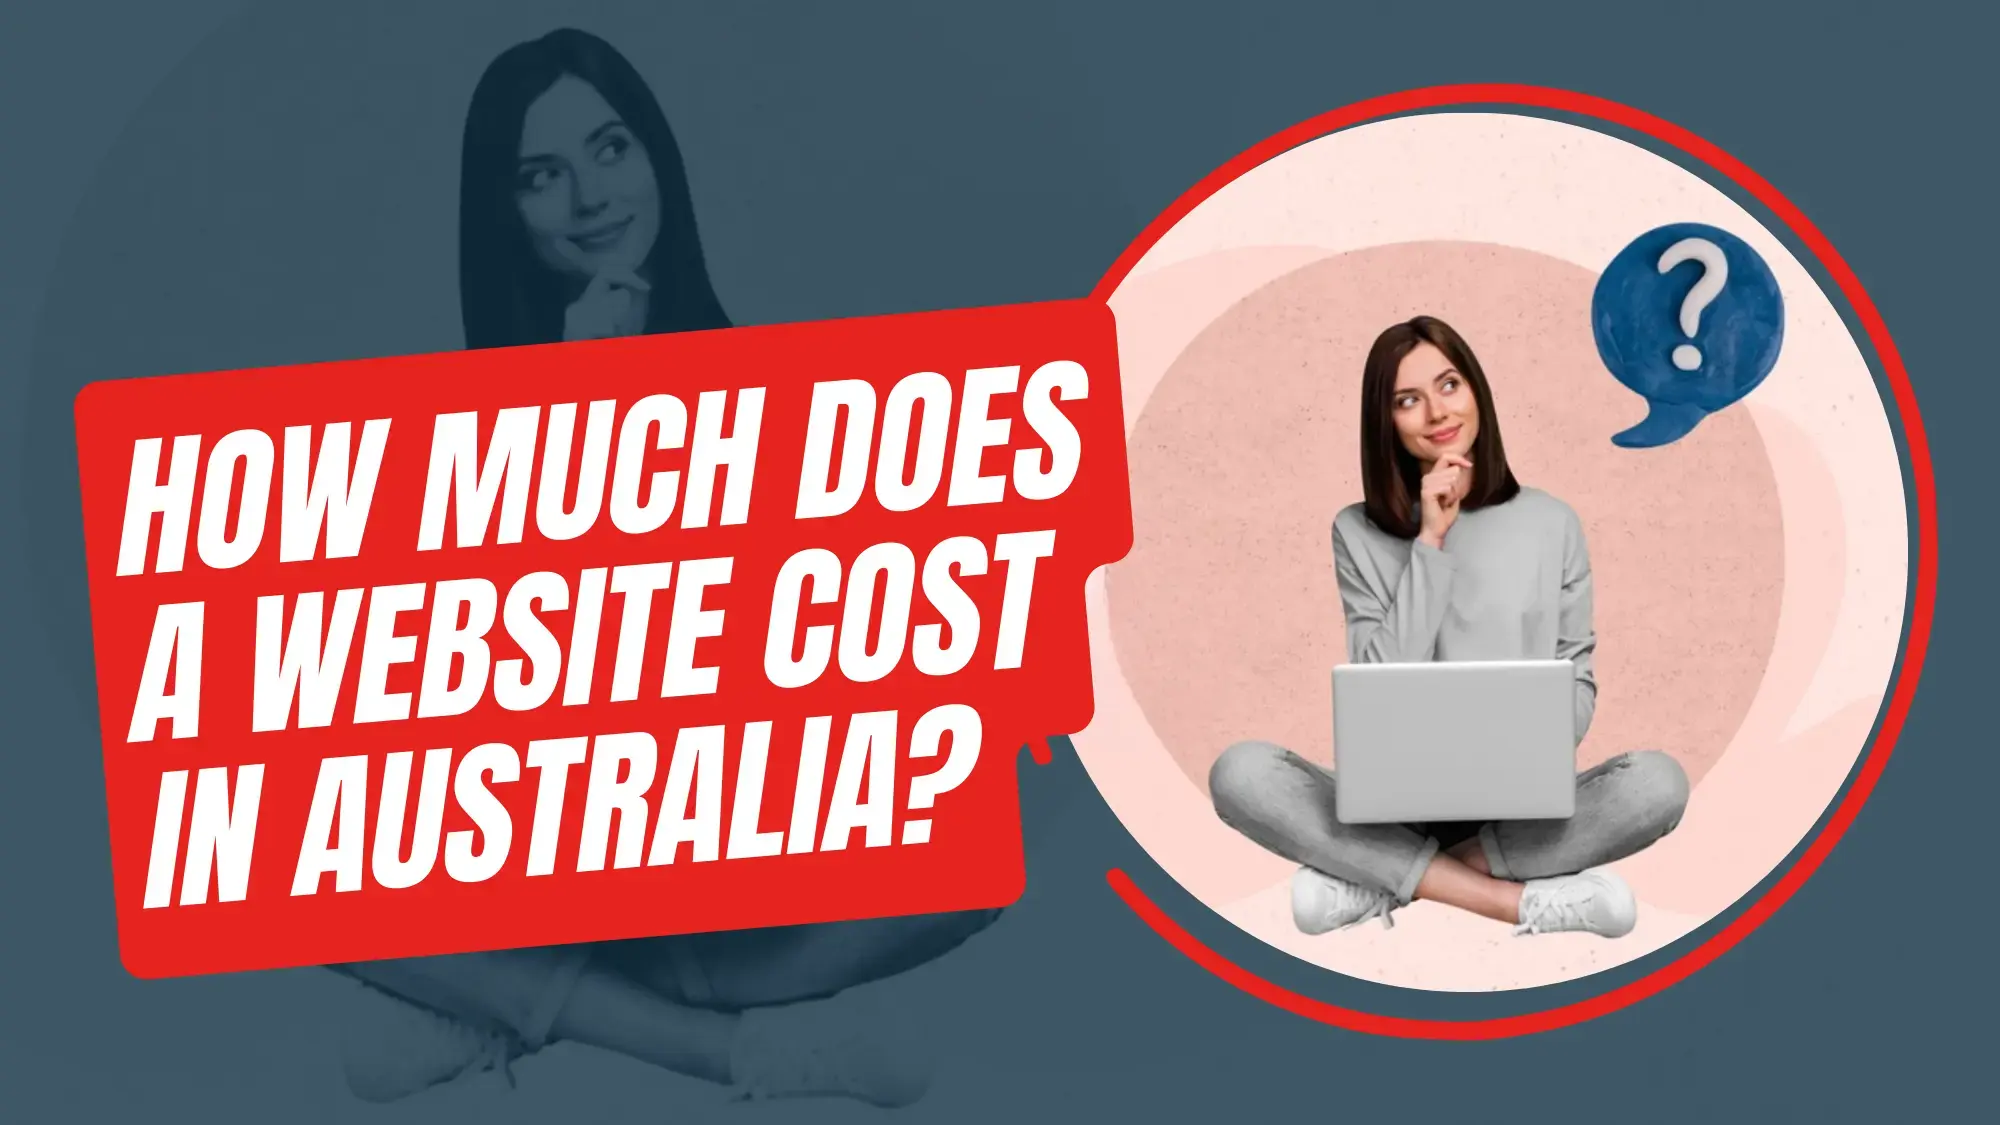 How Much Does a Website Cost in Australia?